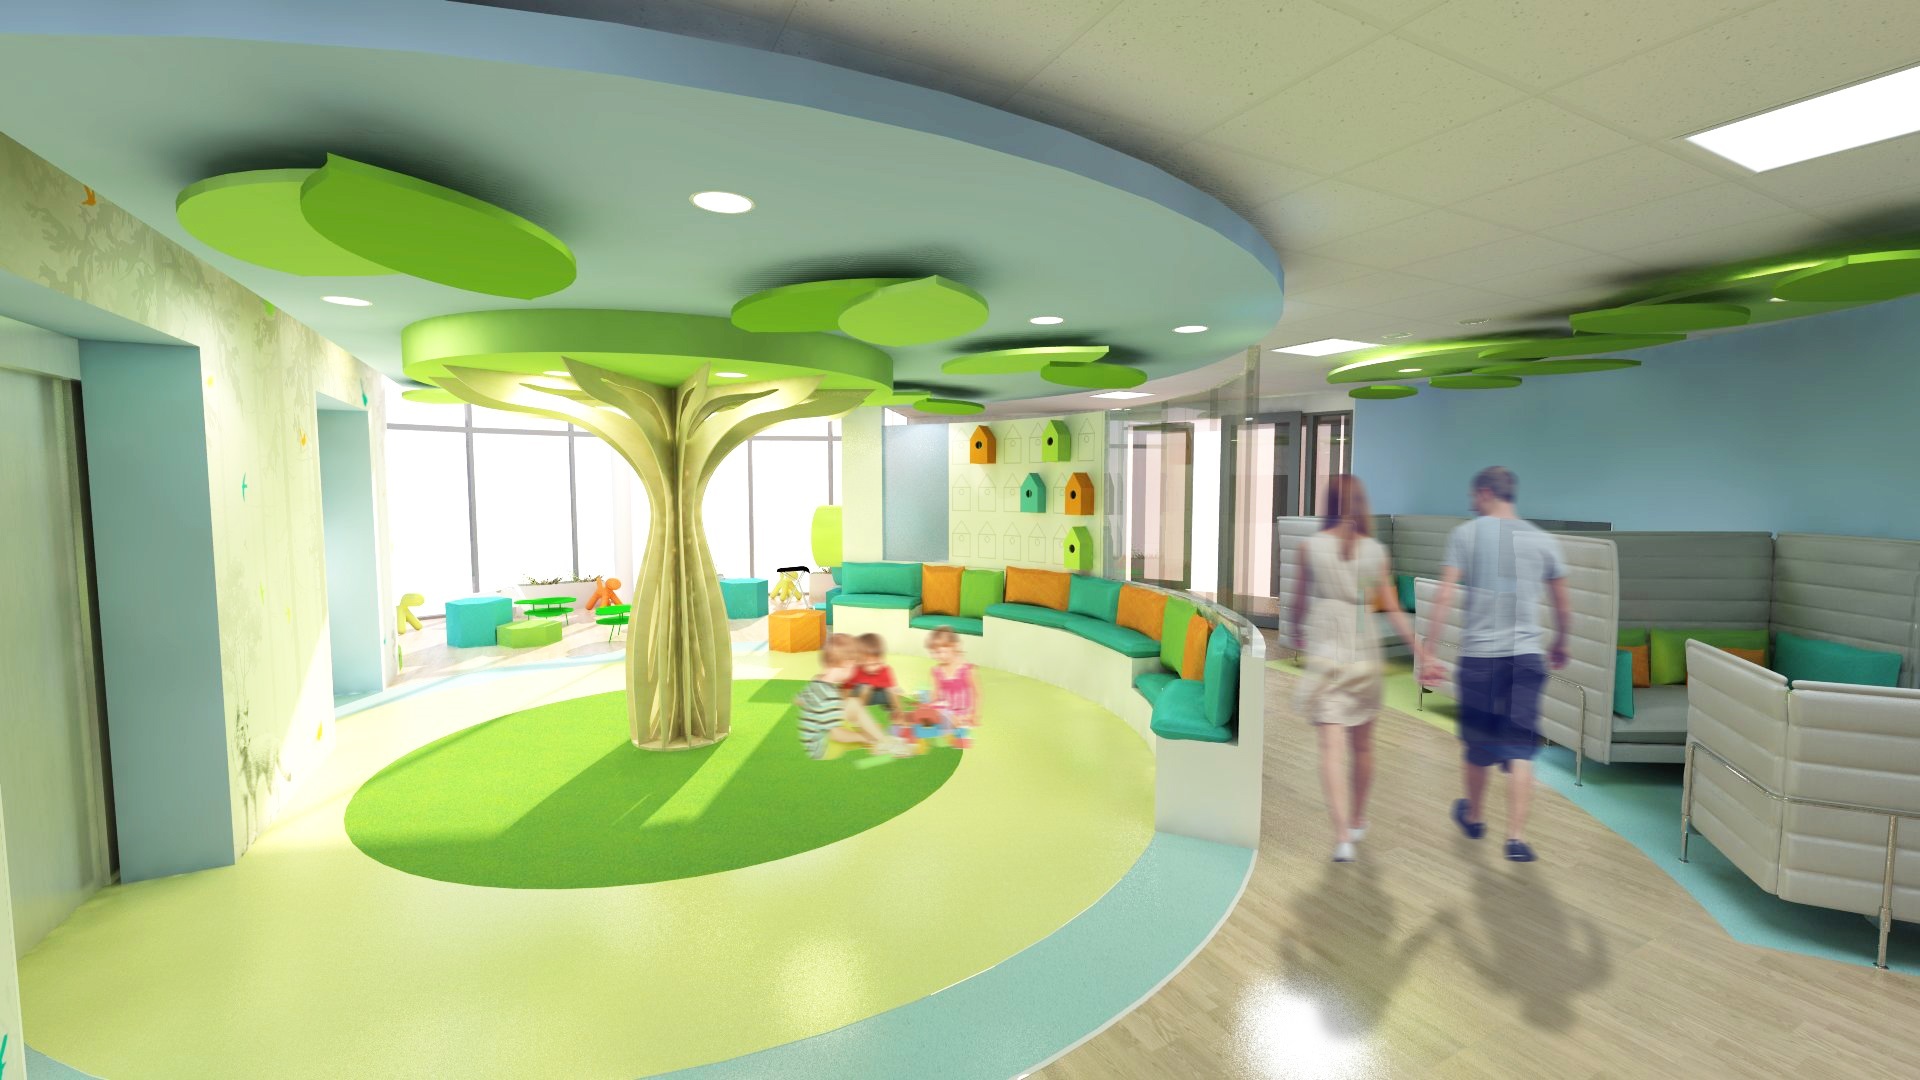 How the hospital's new reception area will look.